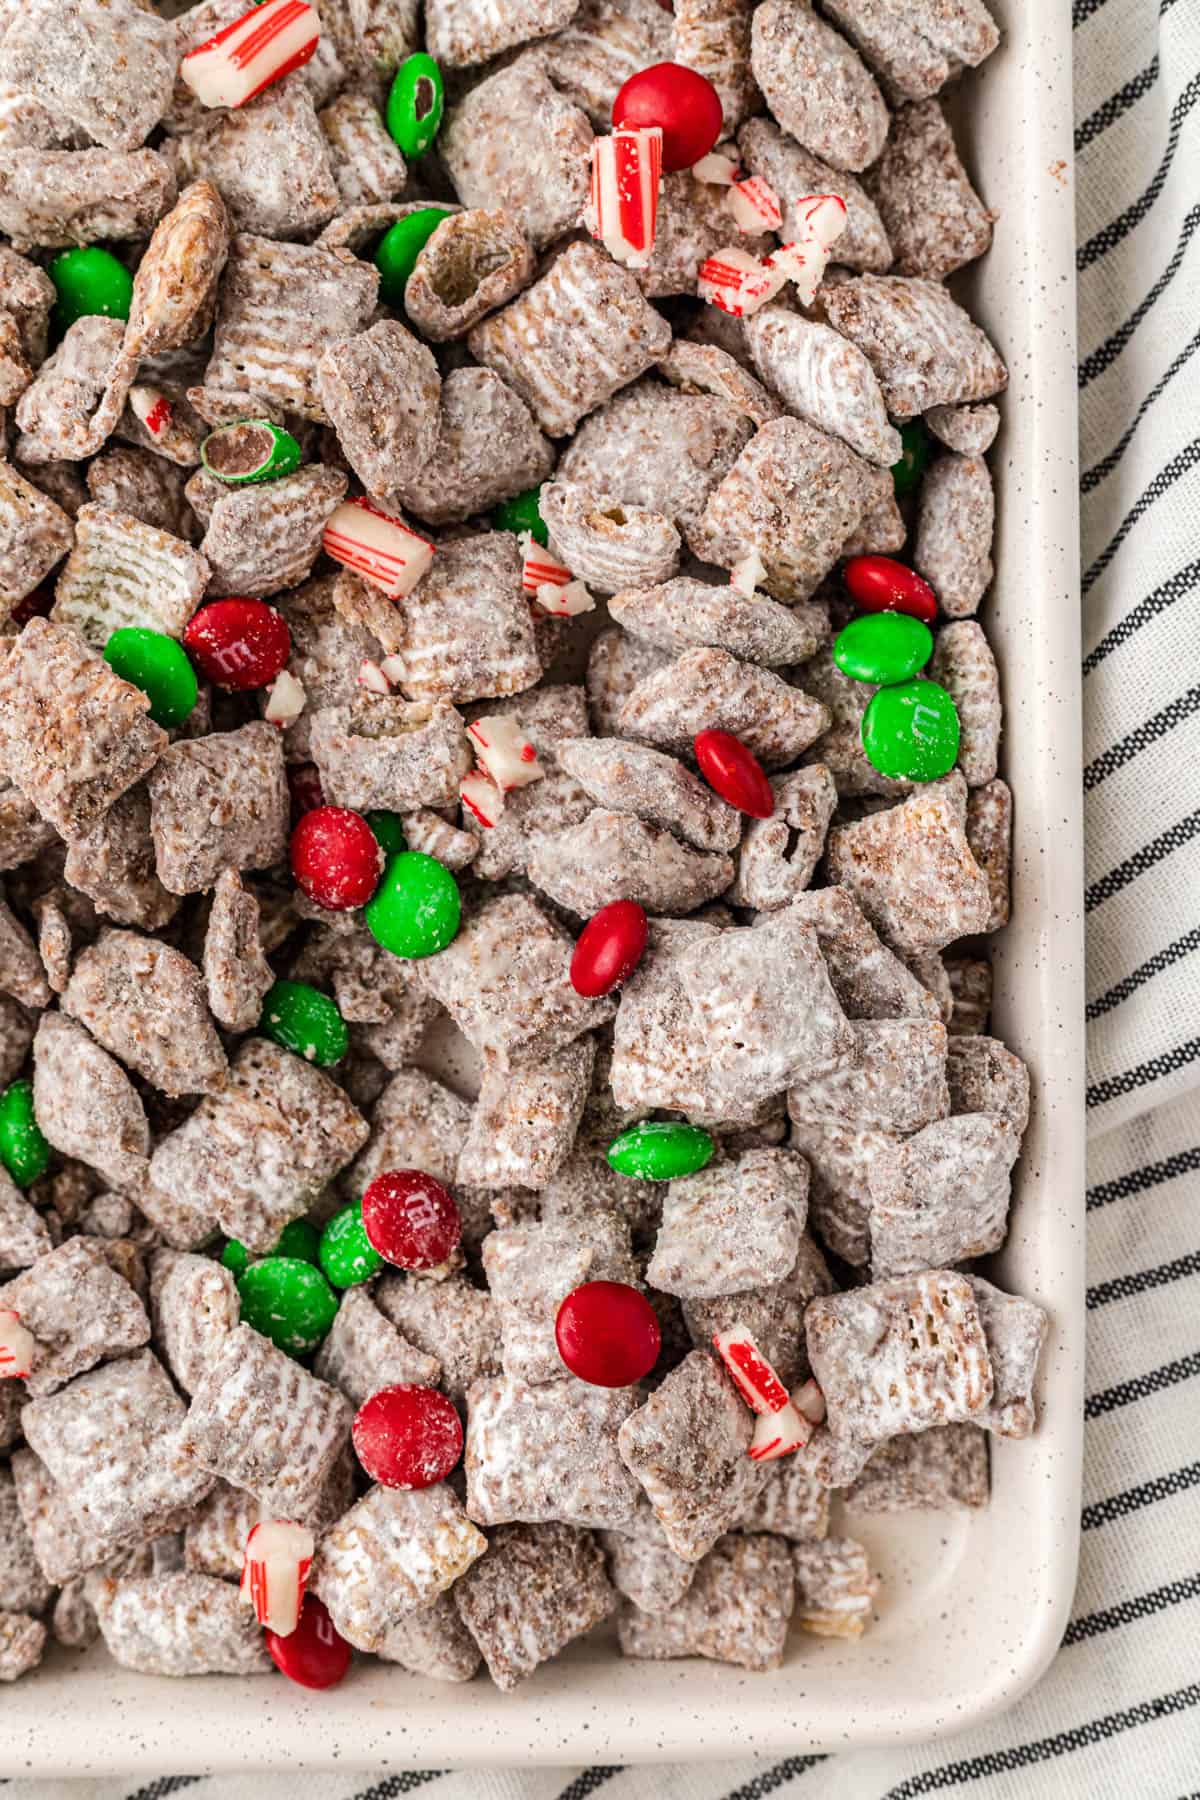 Christmas muddy buddies spread out on a baking sheet.